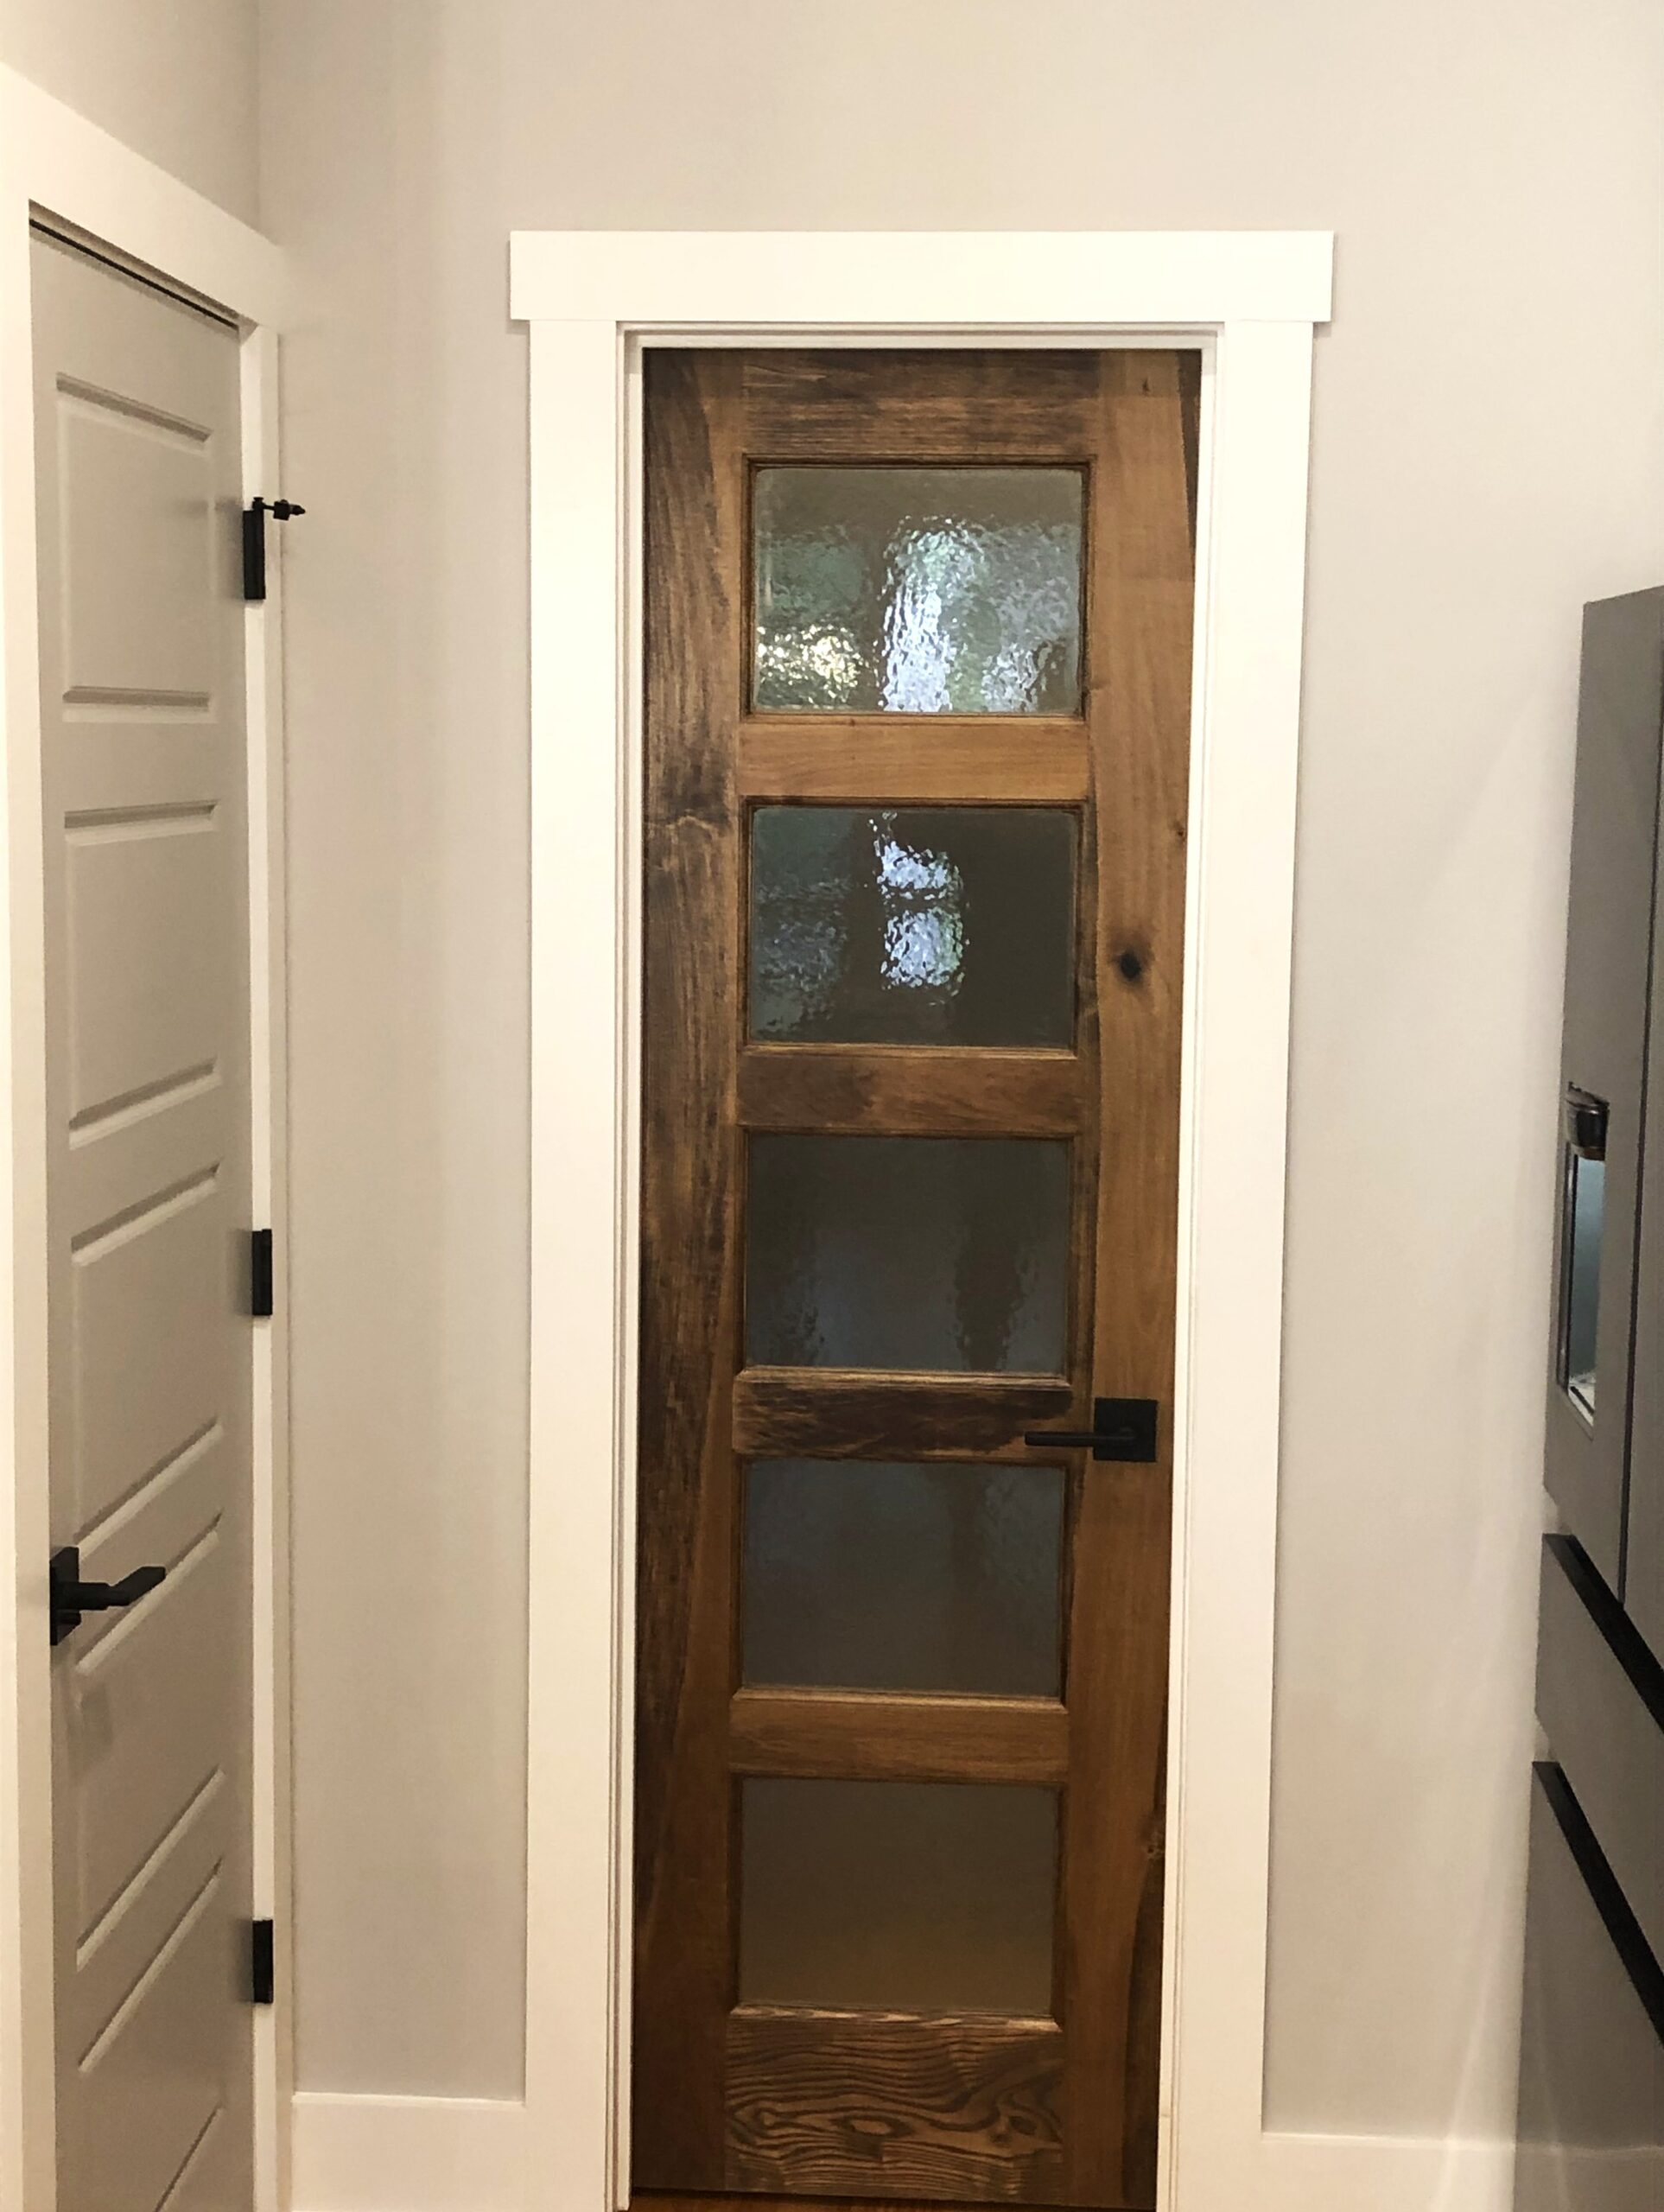 A finished renovation of a pantry door, which creates an opaque and rustic look.